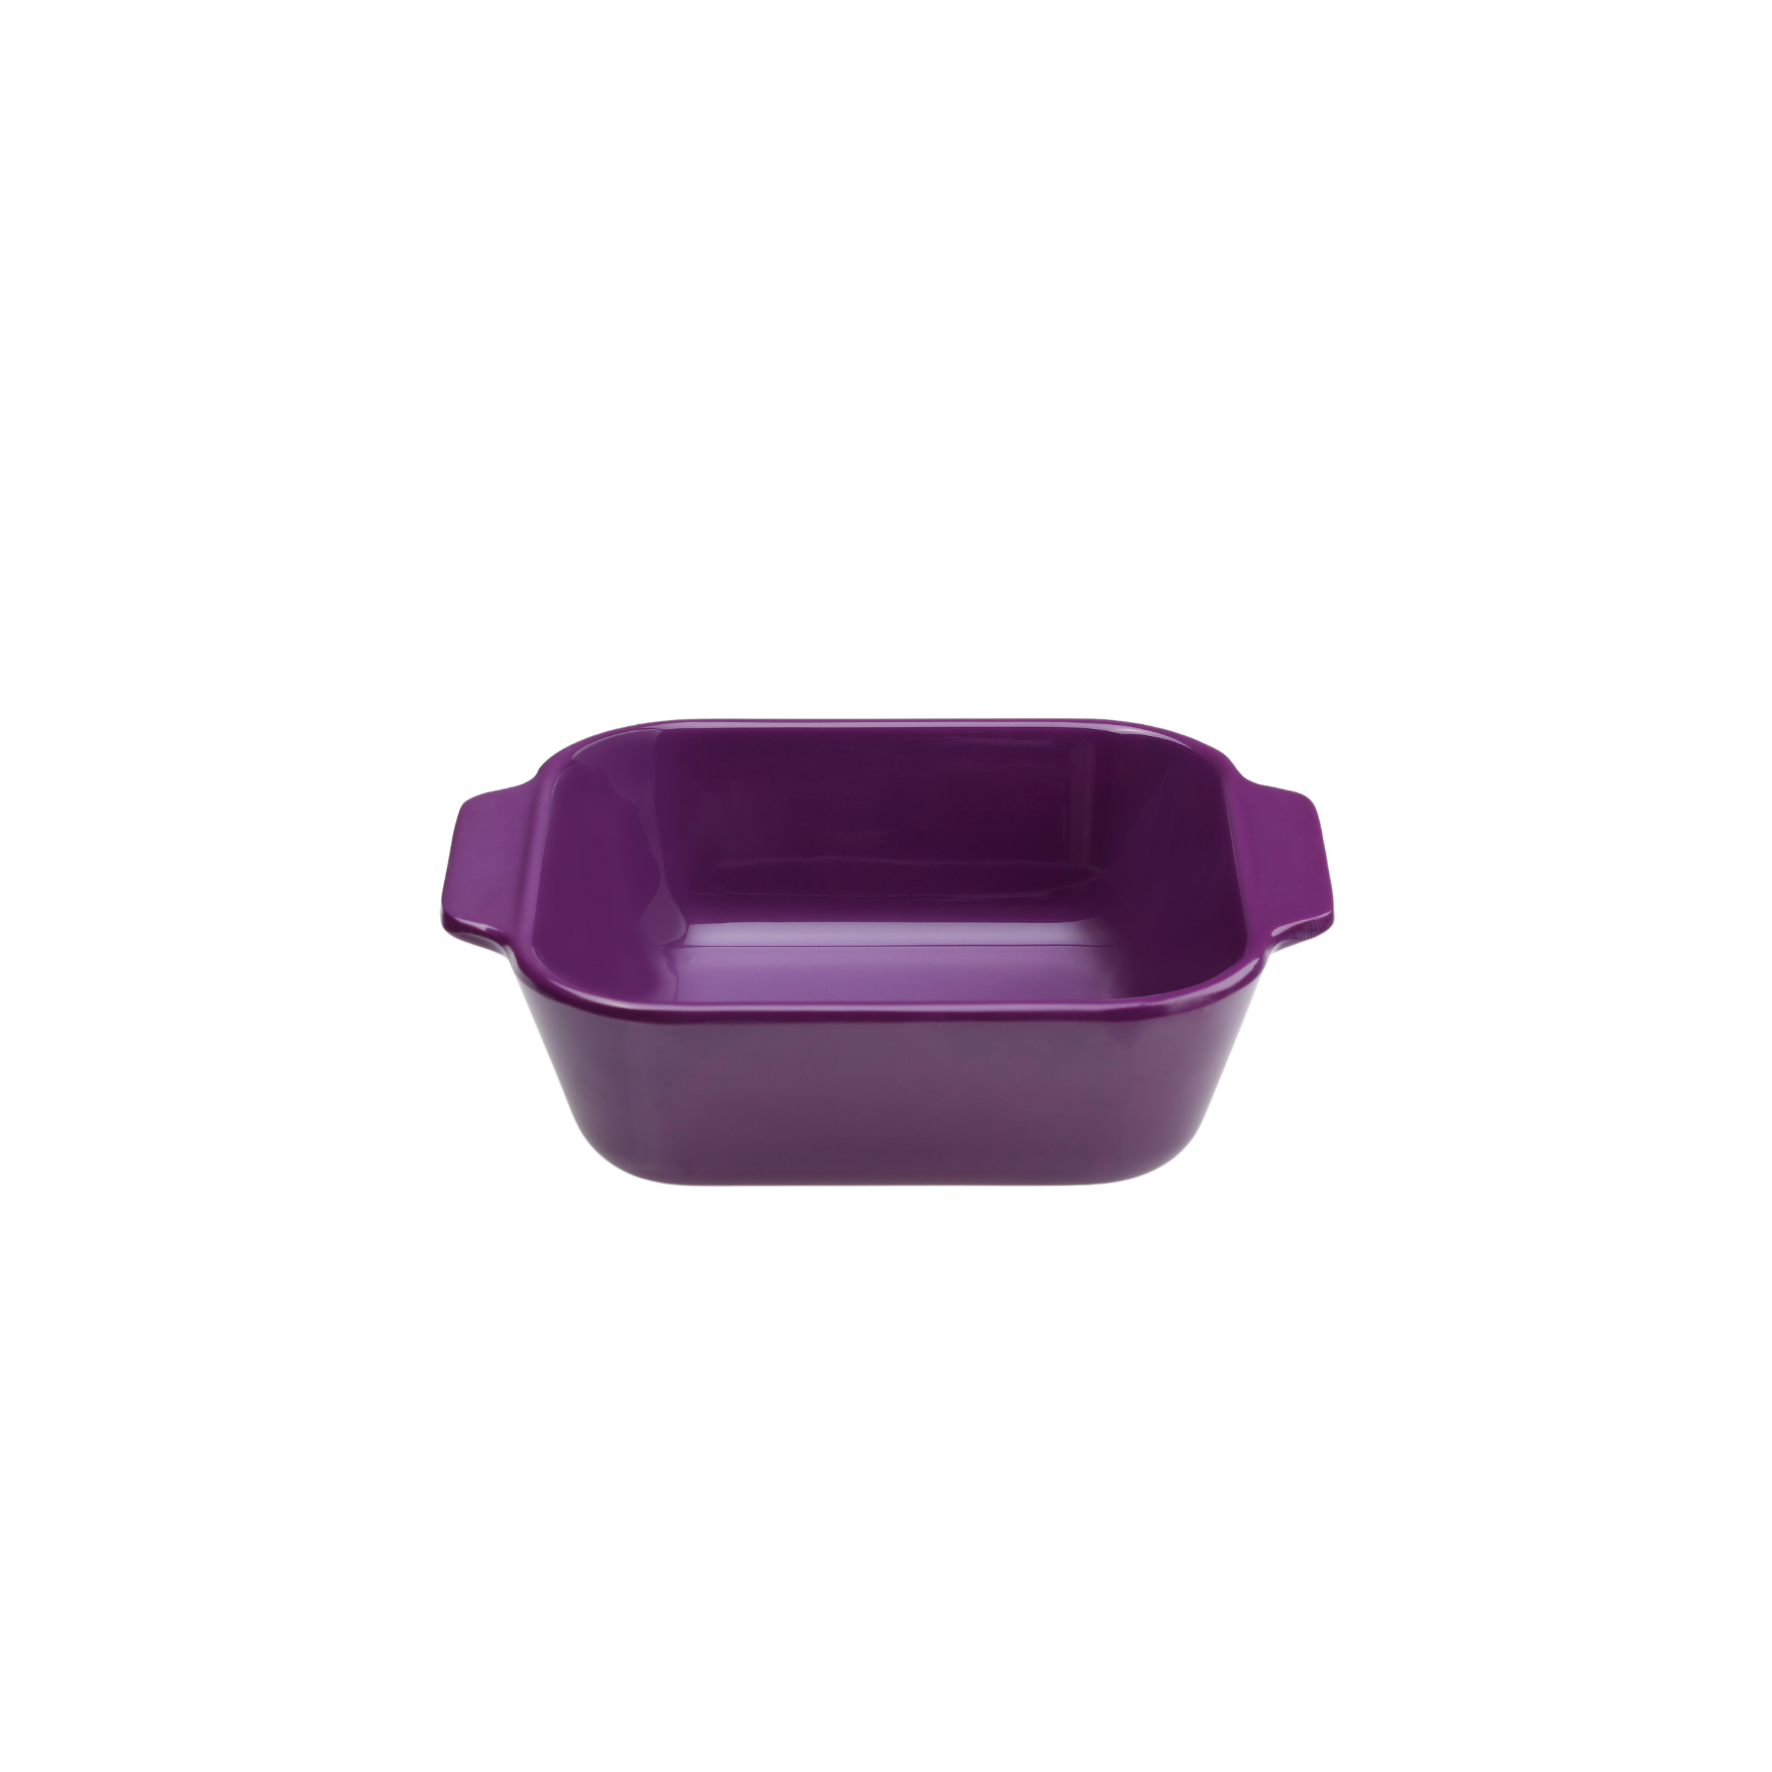 The Plate Story - Snack Bowl with Handle 5” for Toddler - Cadbury Purple